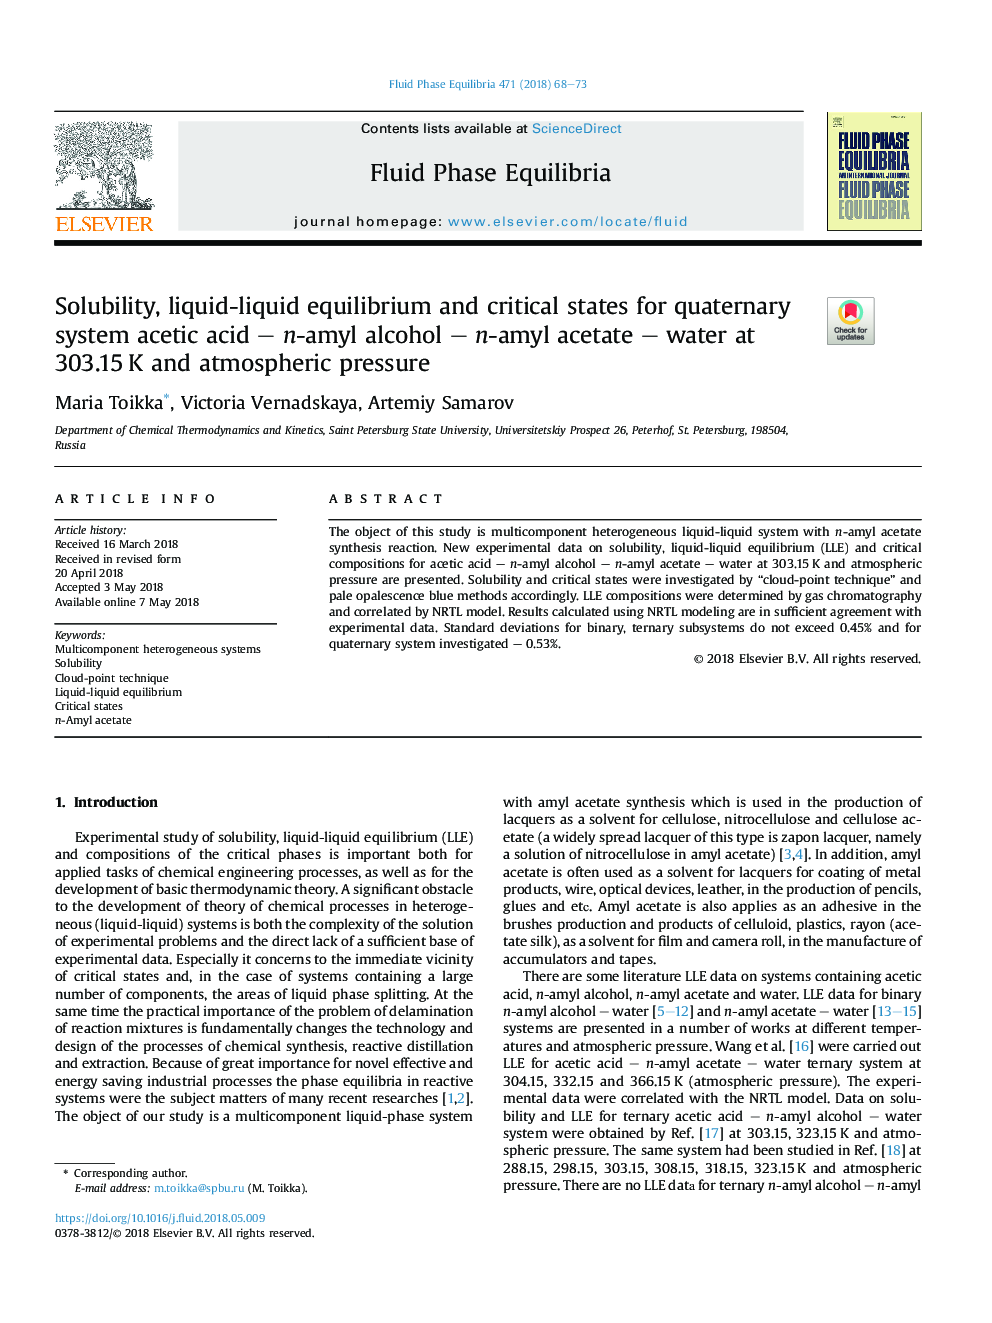 Solubility, liquid-liquid equilibrium and critical states for quaternary system acetic acid - n-amyl alcohol - n-amyl acetate - water at 303.15â¯K and atmospheric pressure